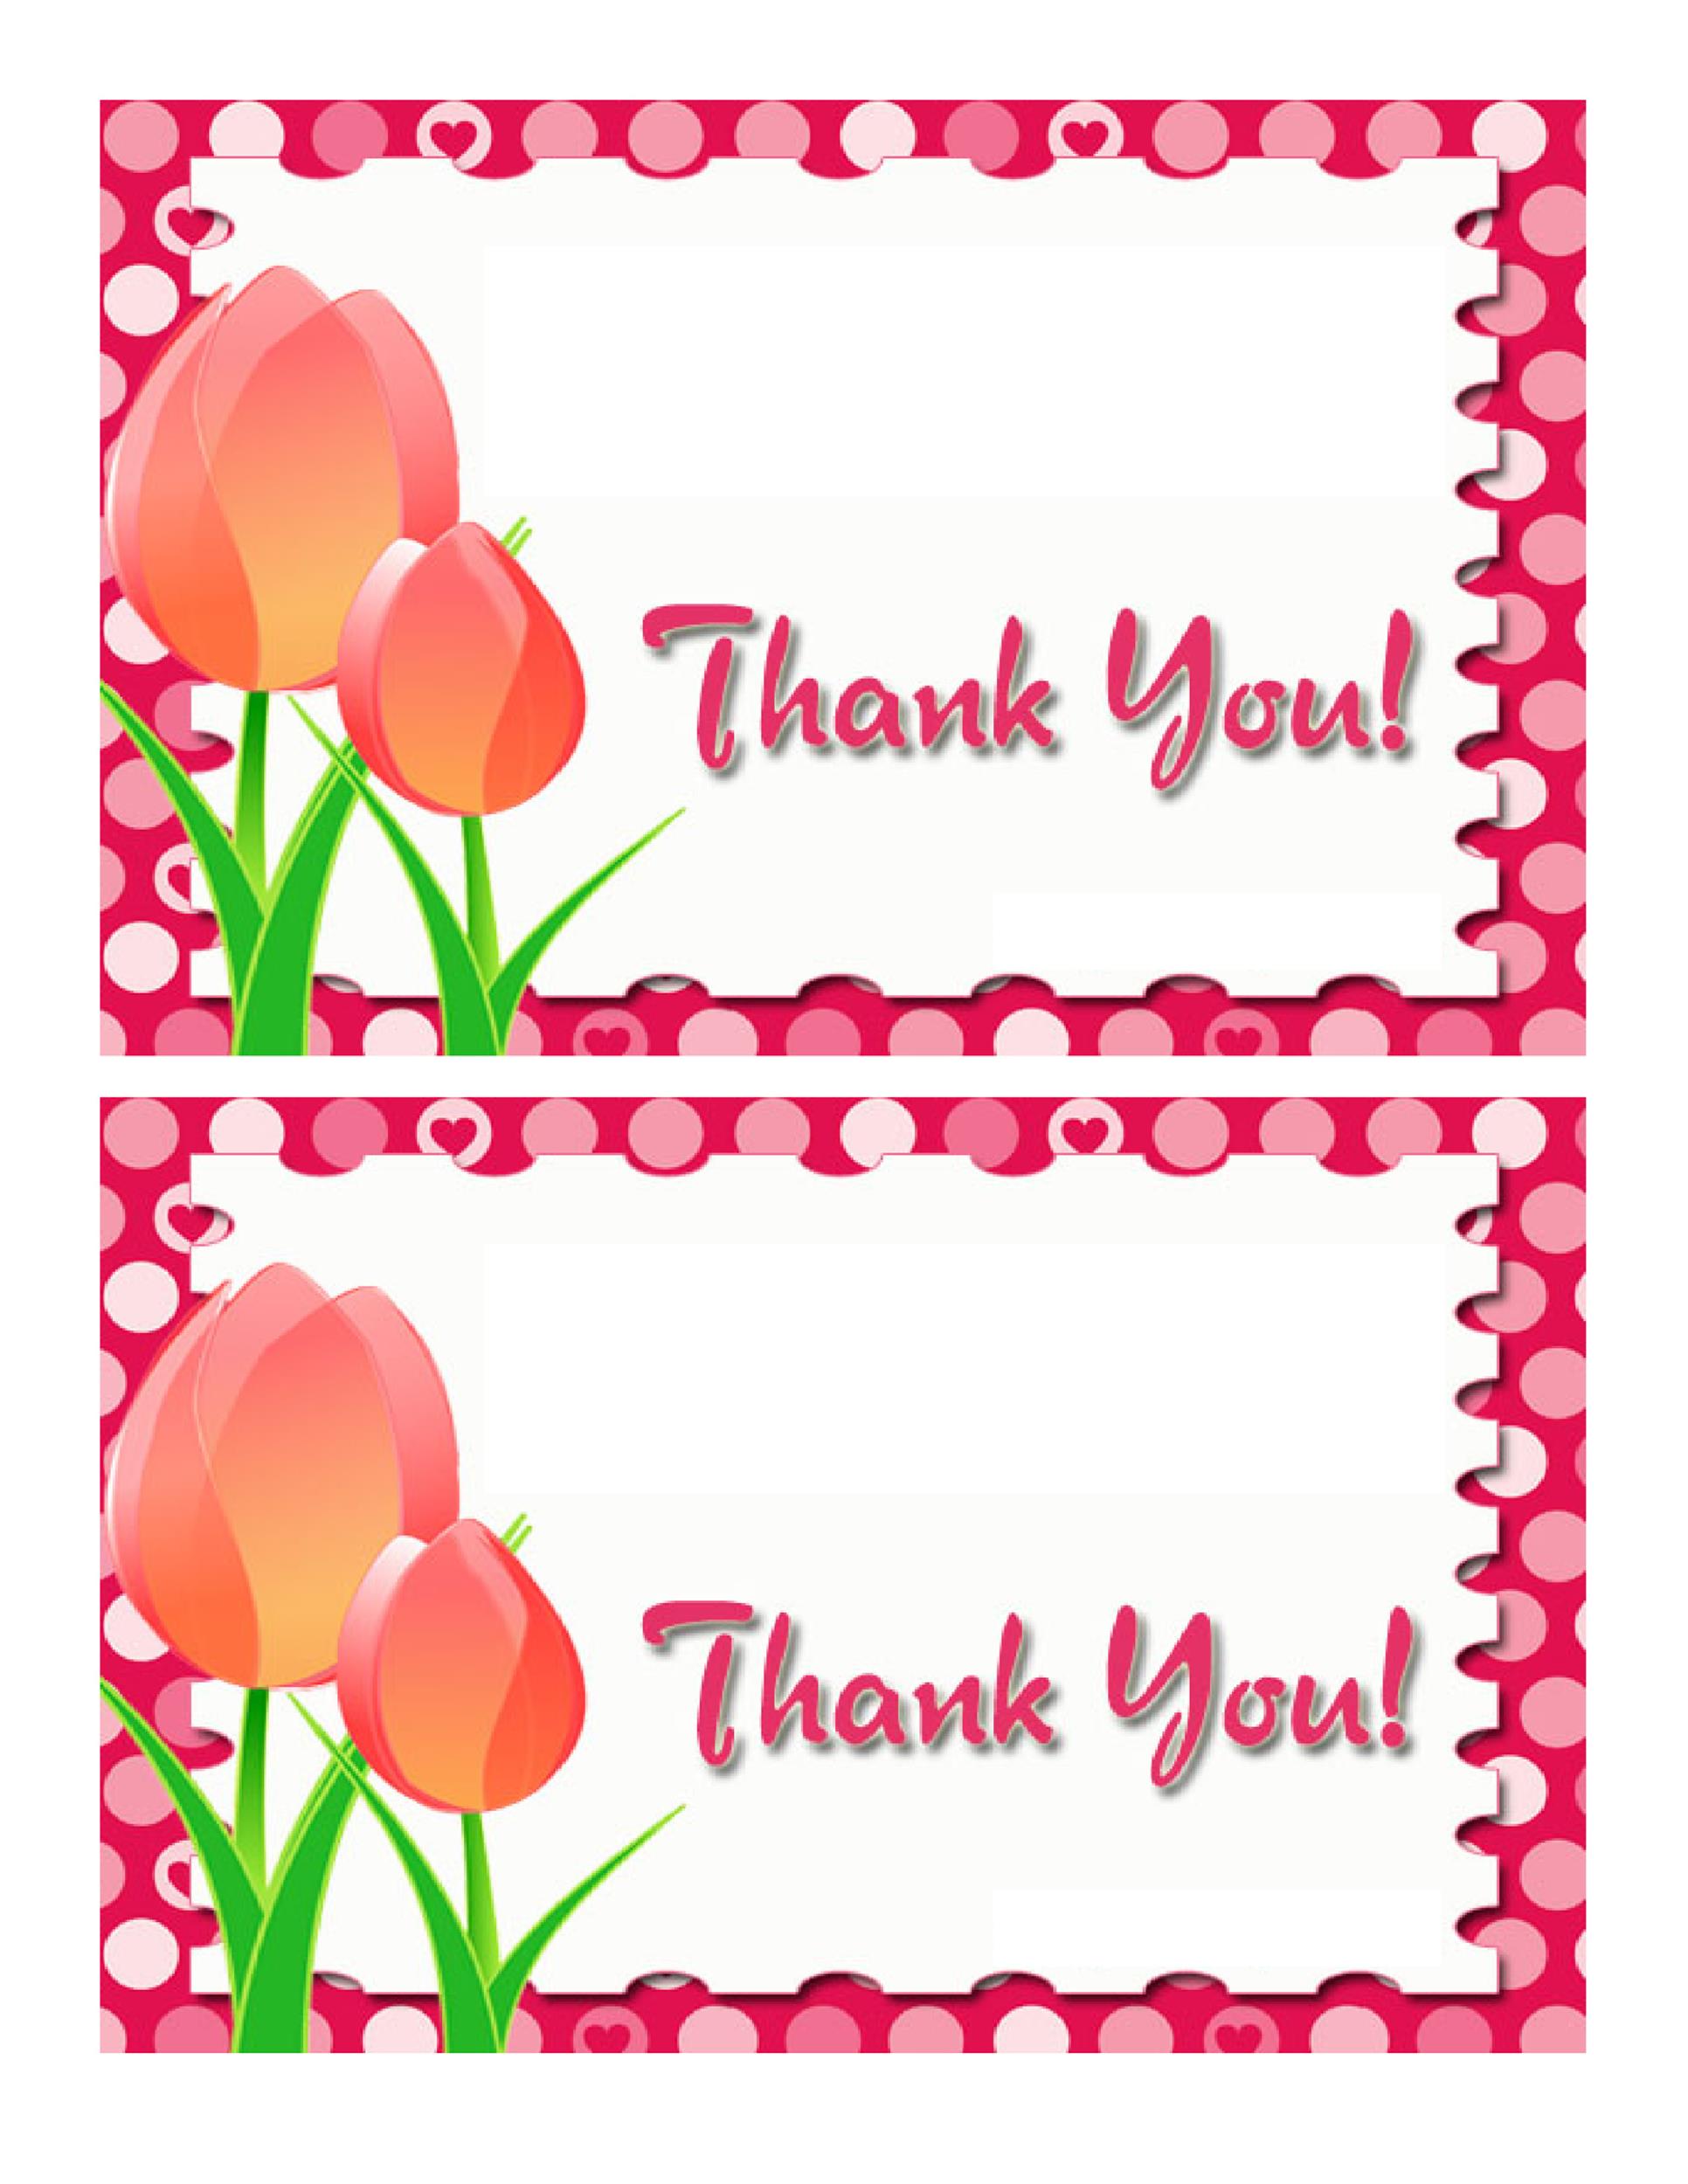 thank-you-card-templates-11-free-word-excel-pdf-formats-samples-examples-designs